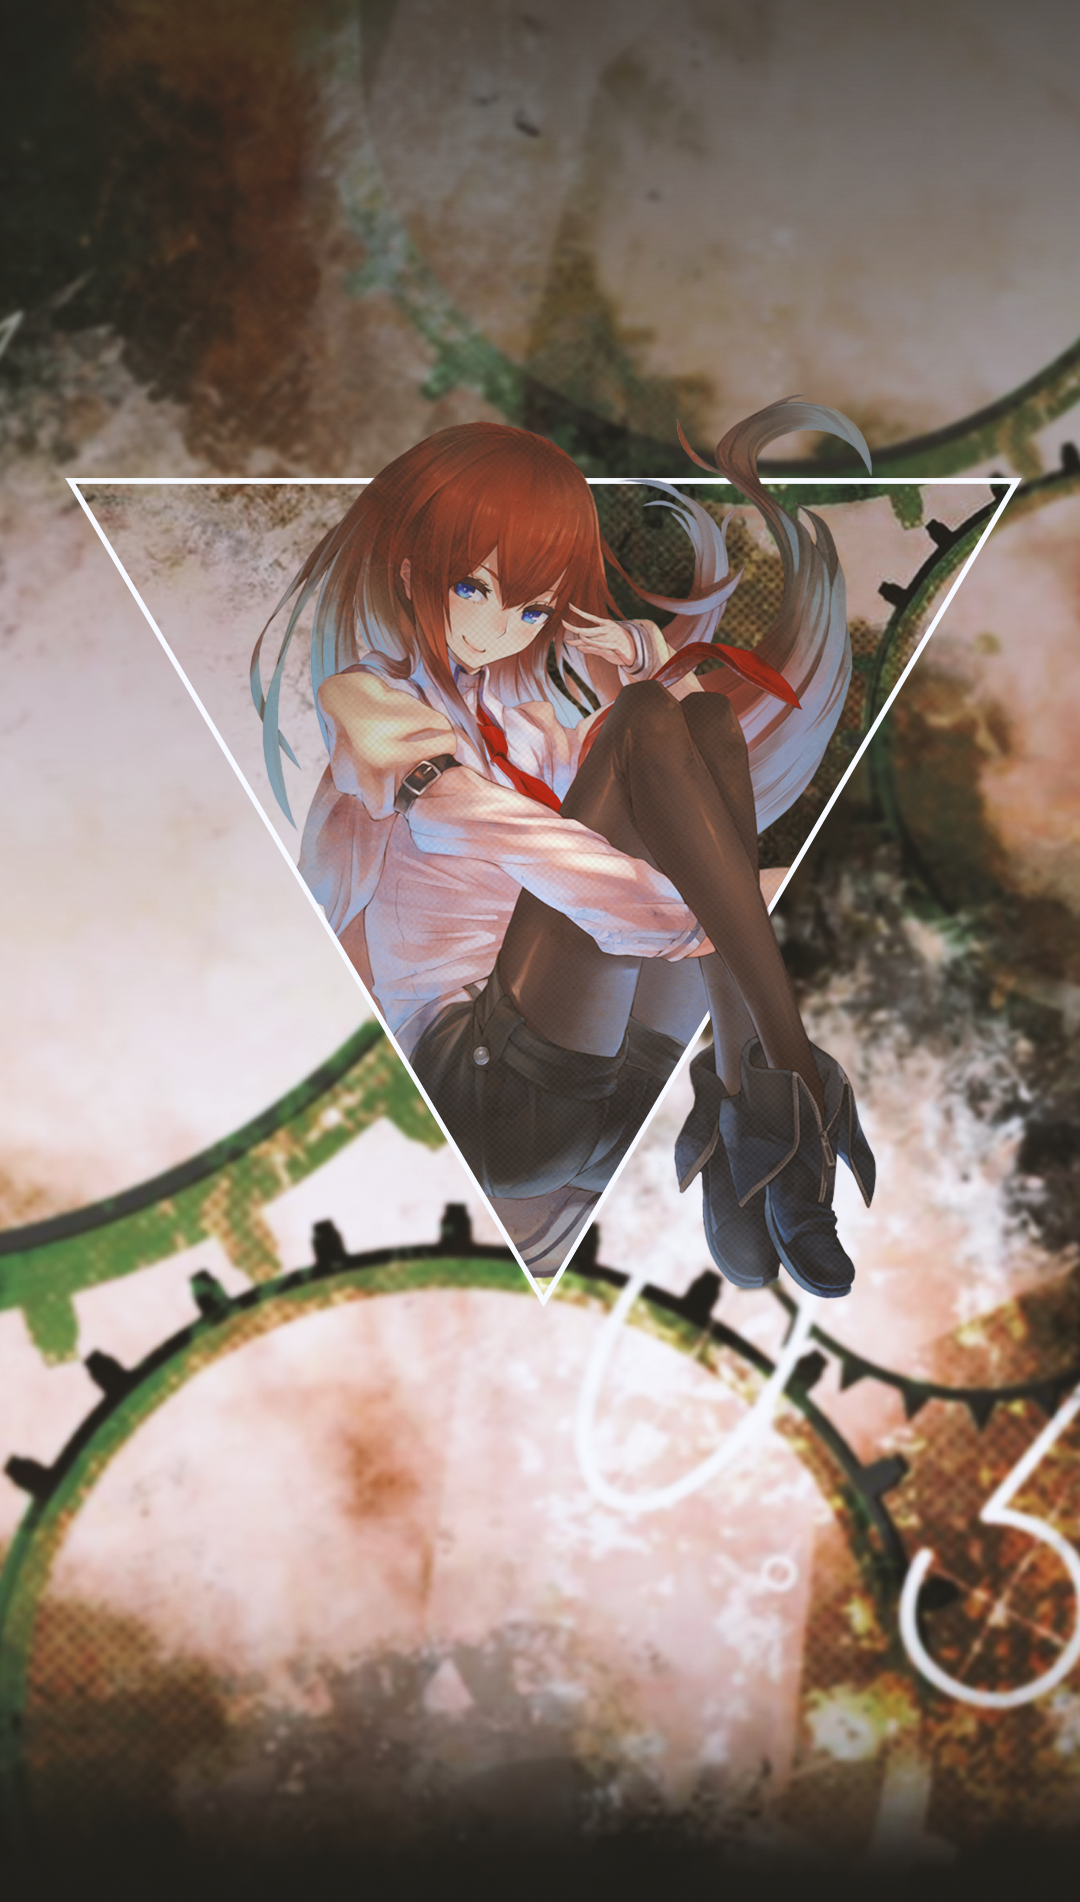 Anime 1080x1902 anime anime girls picture-in-picture Steins;Gate Makise Kurisu